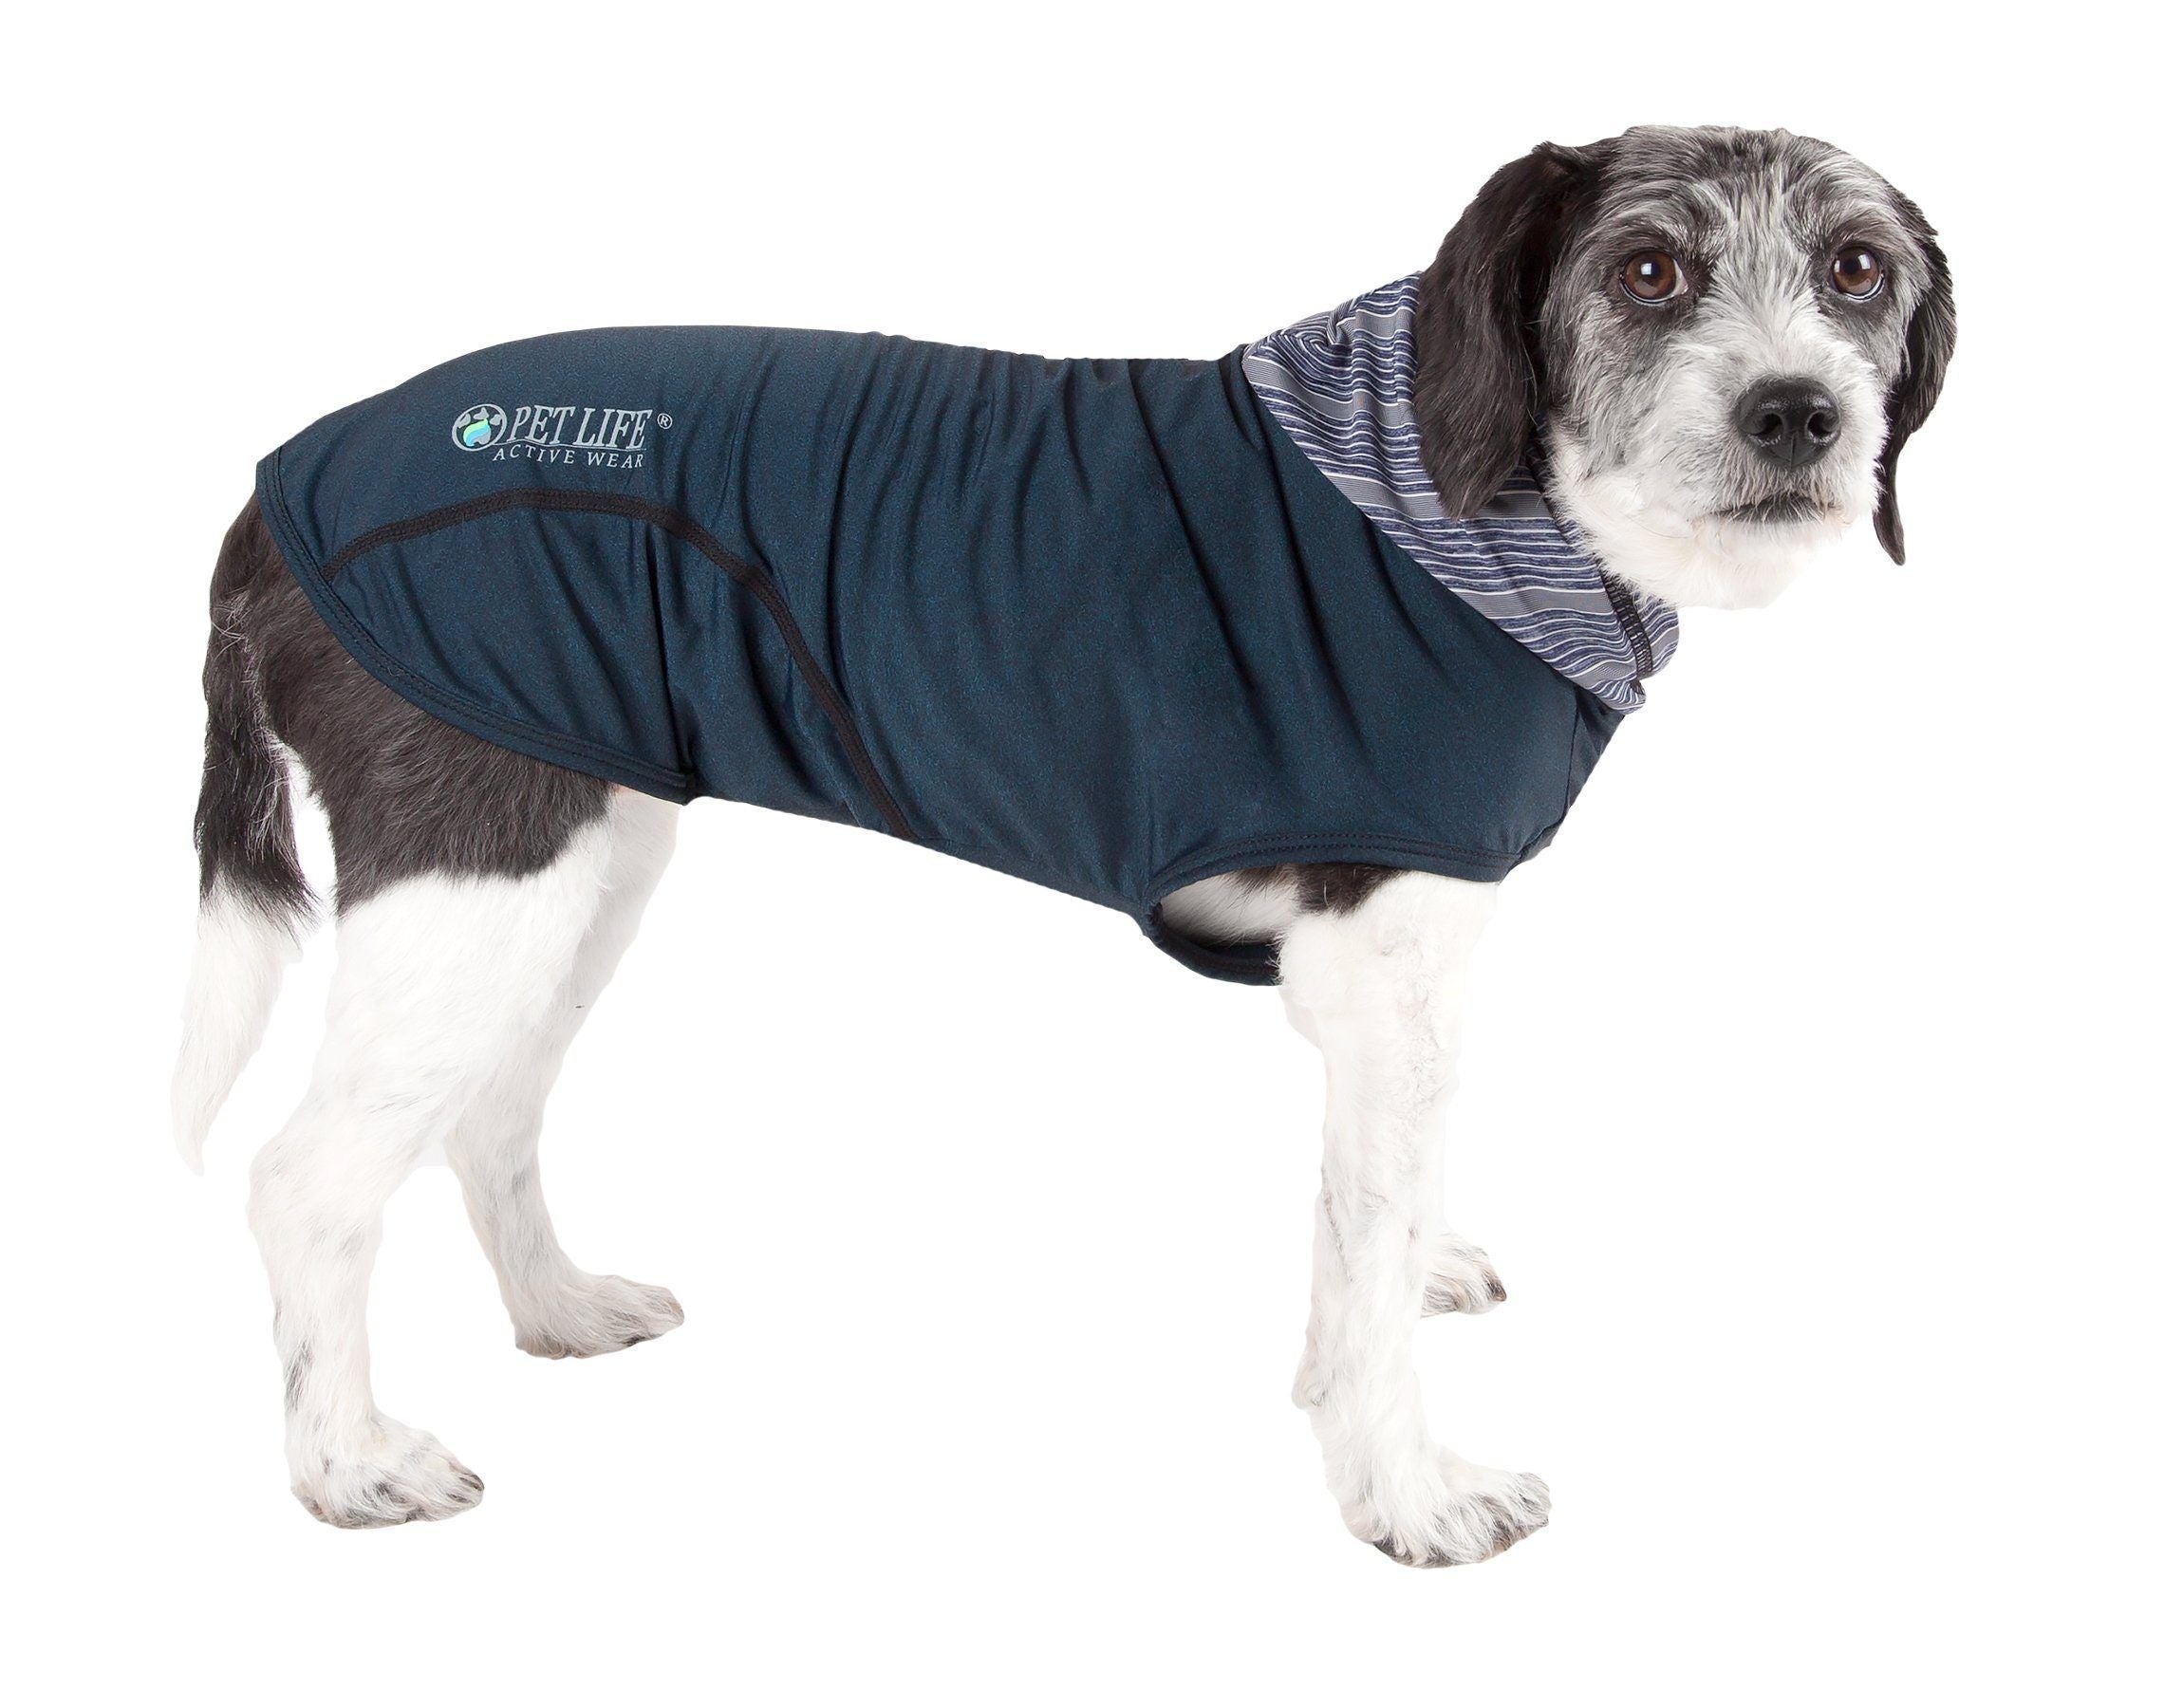 Pet Life ® Active 'Pull-Rover' 4-Way Stretch Sleeveless Fitness Yoga Dog T-Shirt Hoodie X-Small Teal